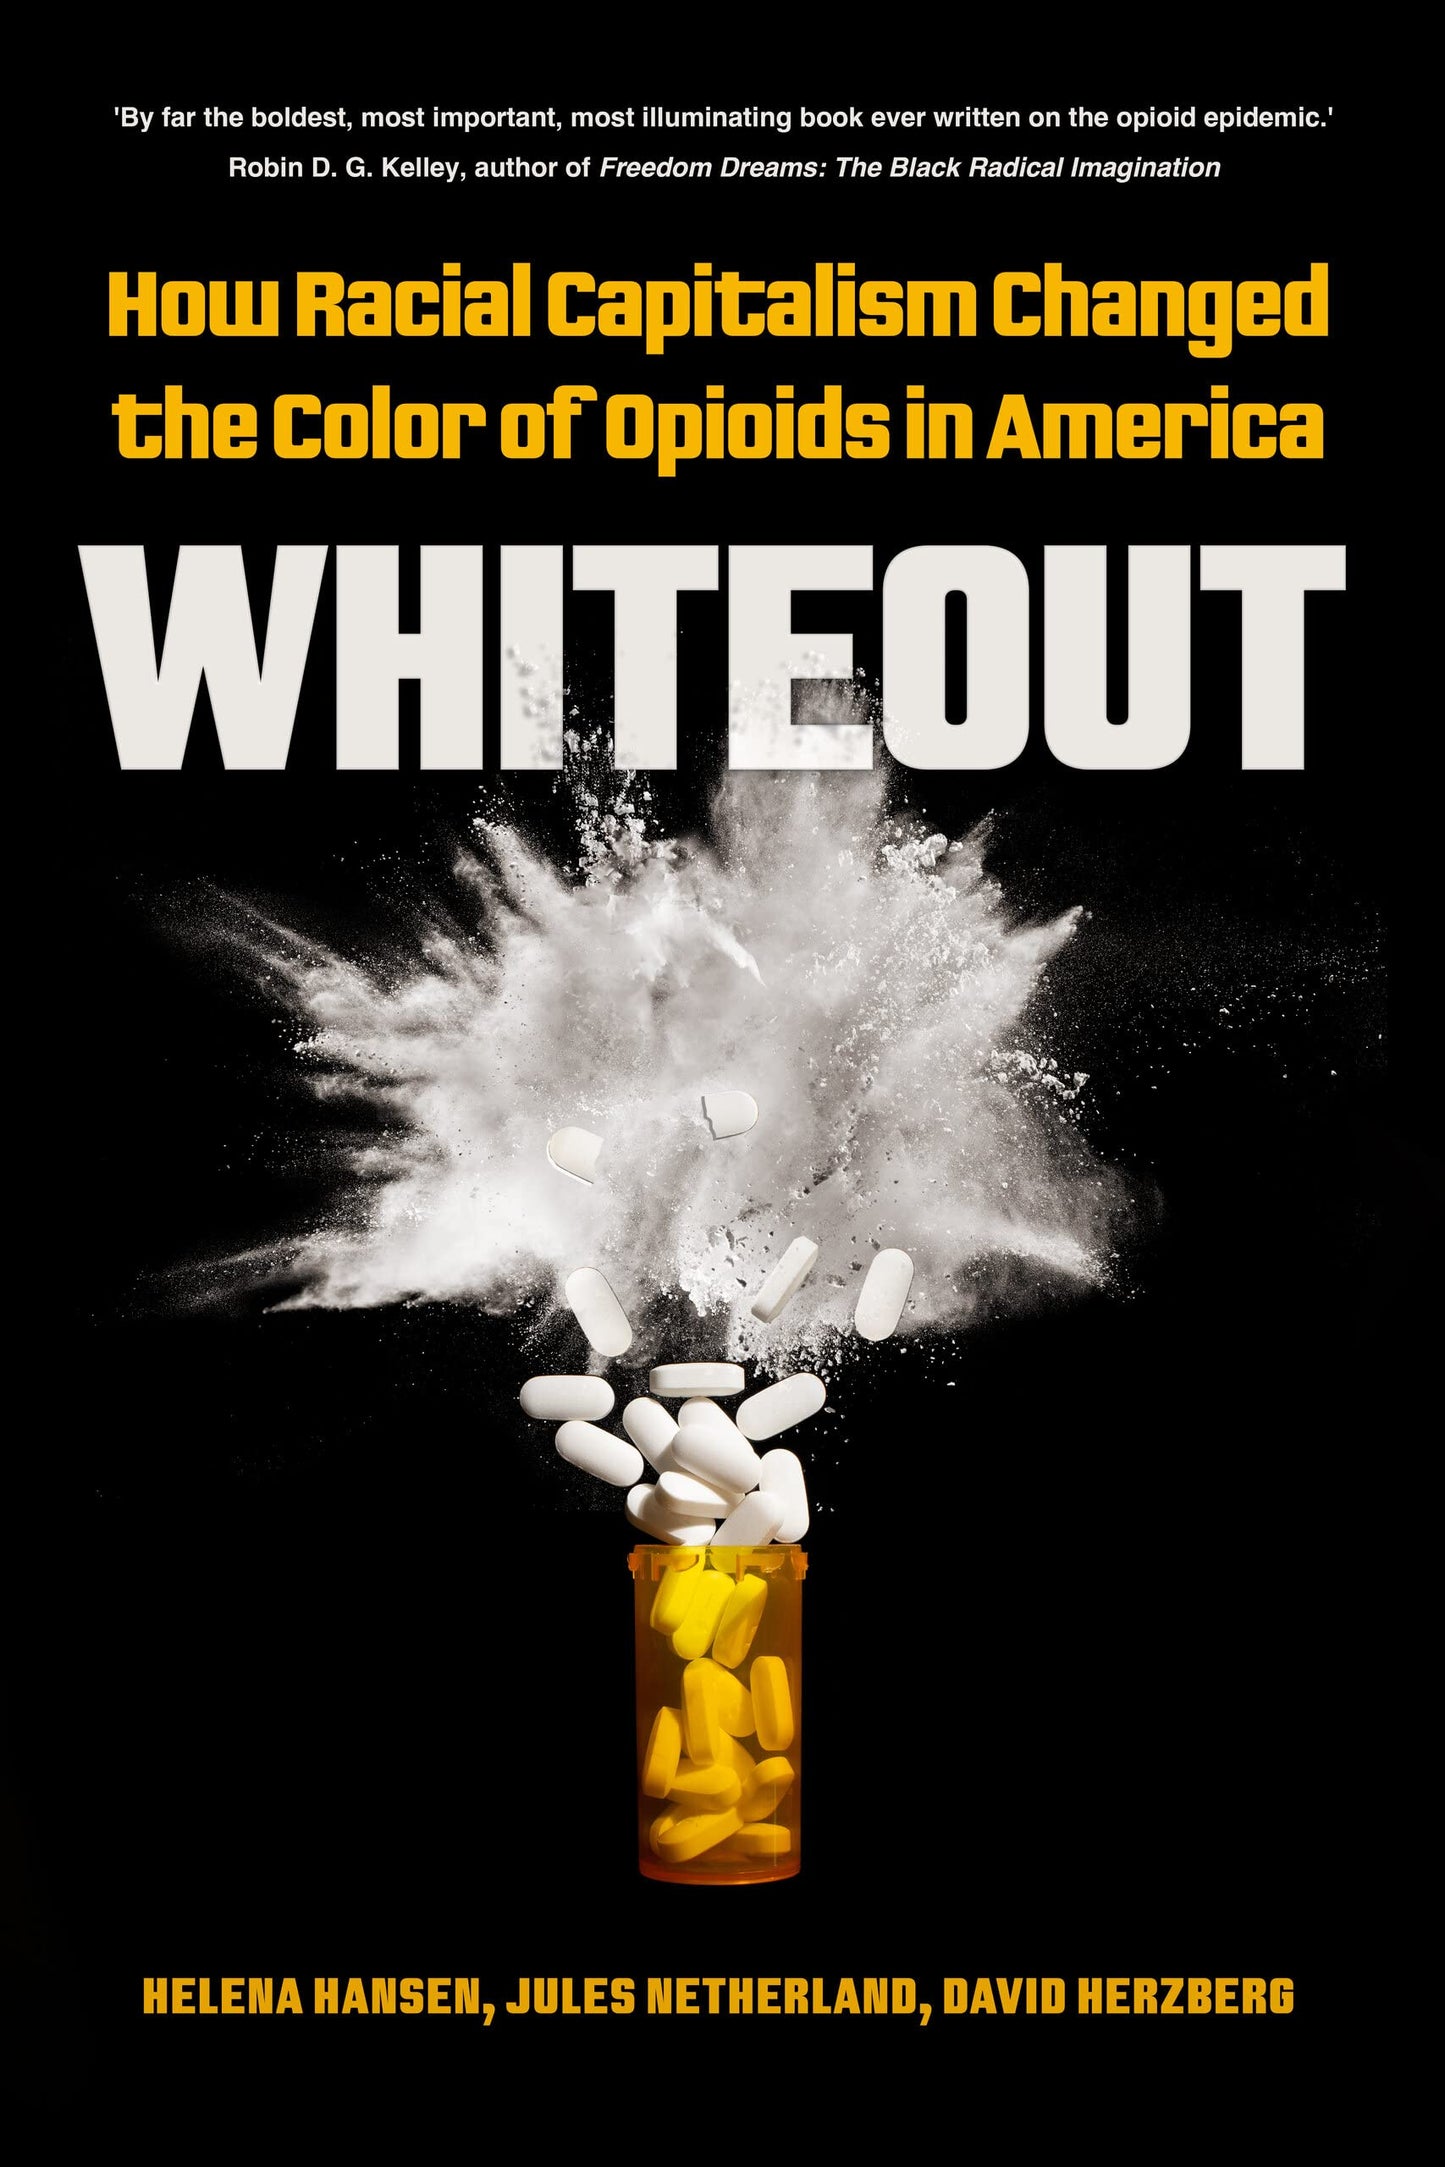 Whiteout: // How Racial Capitalism Changed the Color of Opioids in America